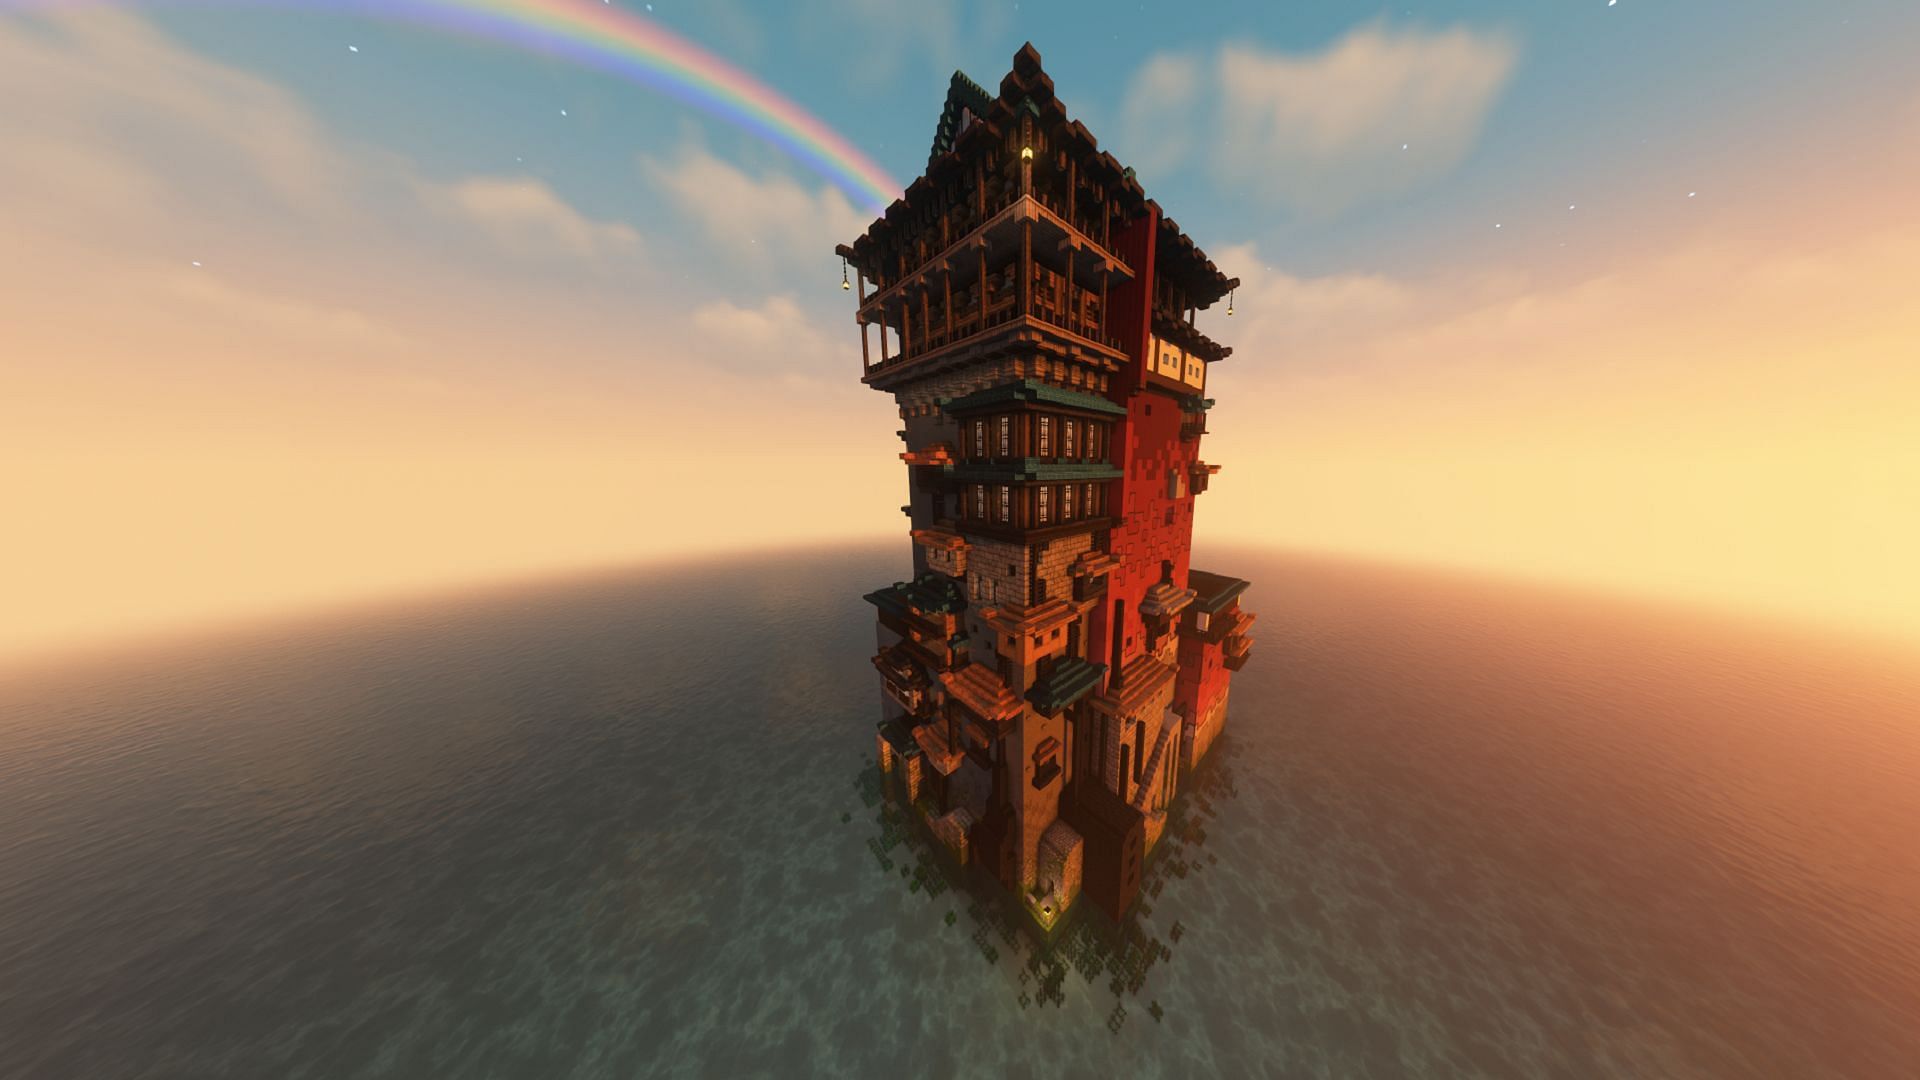 A Minecraft player recently shared their build deriving from Studio Ghibli